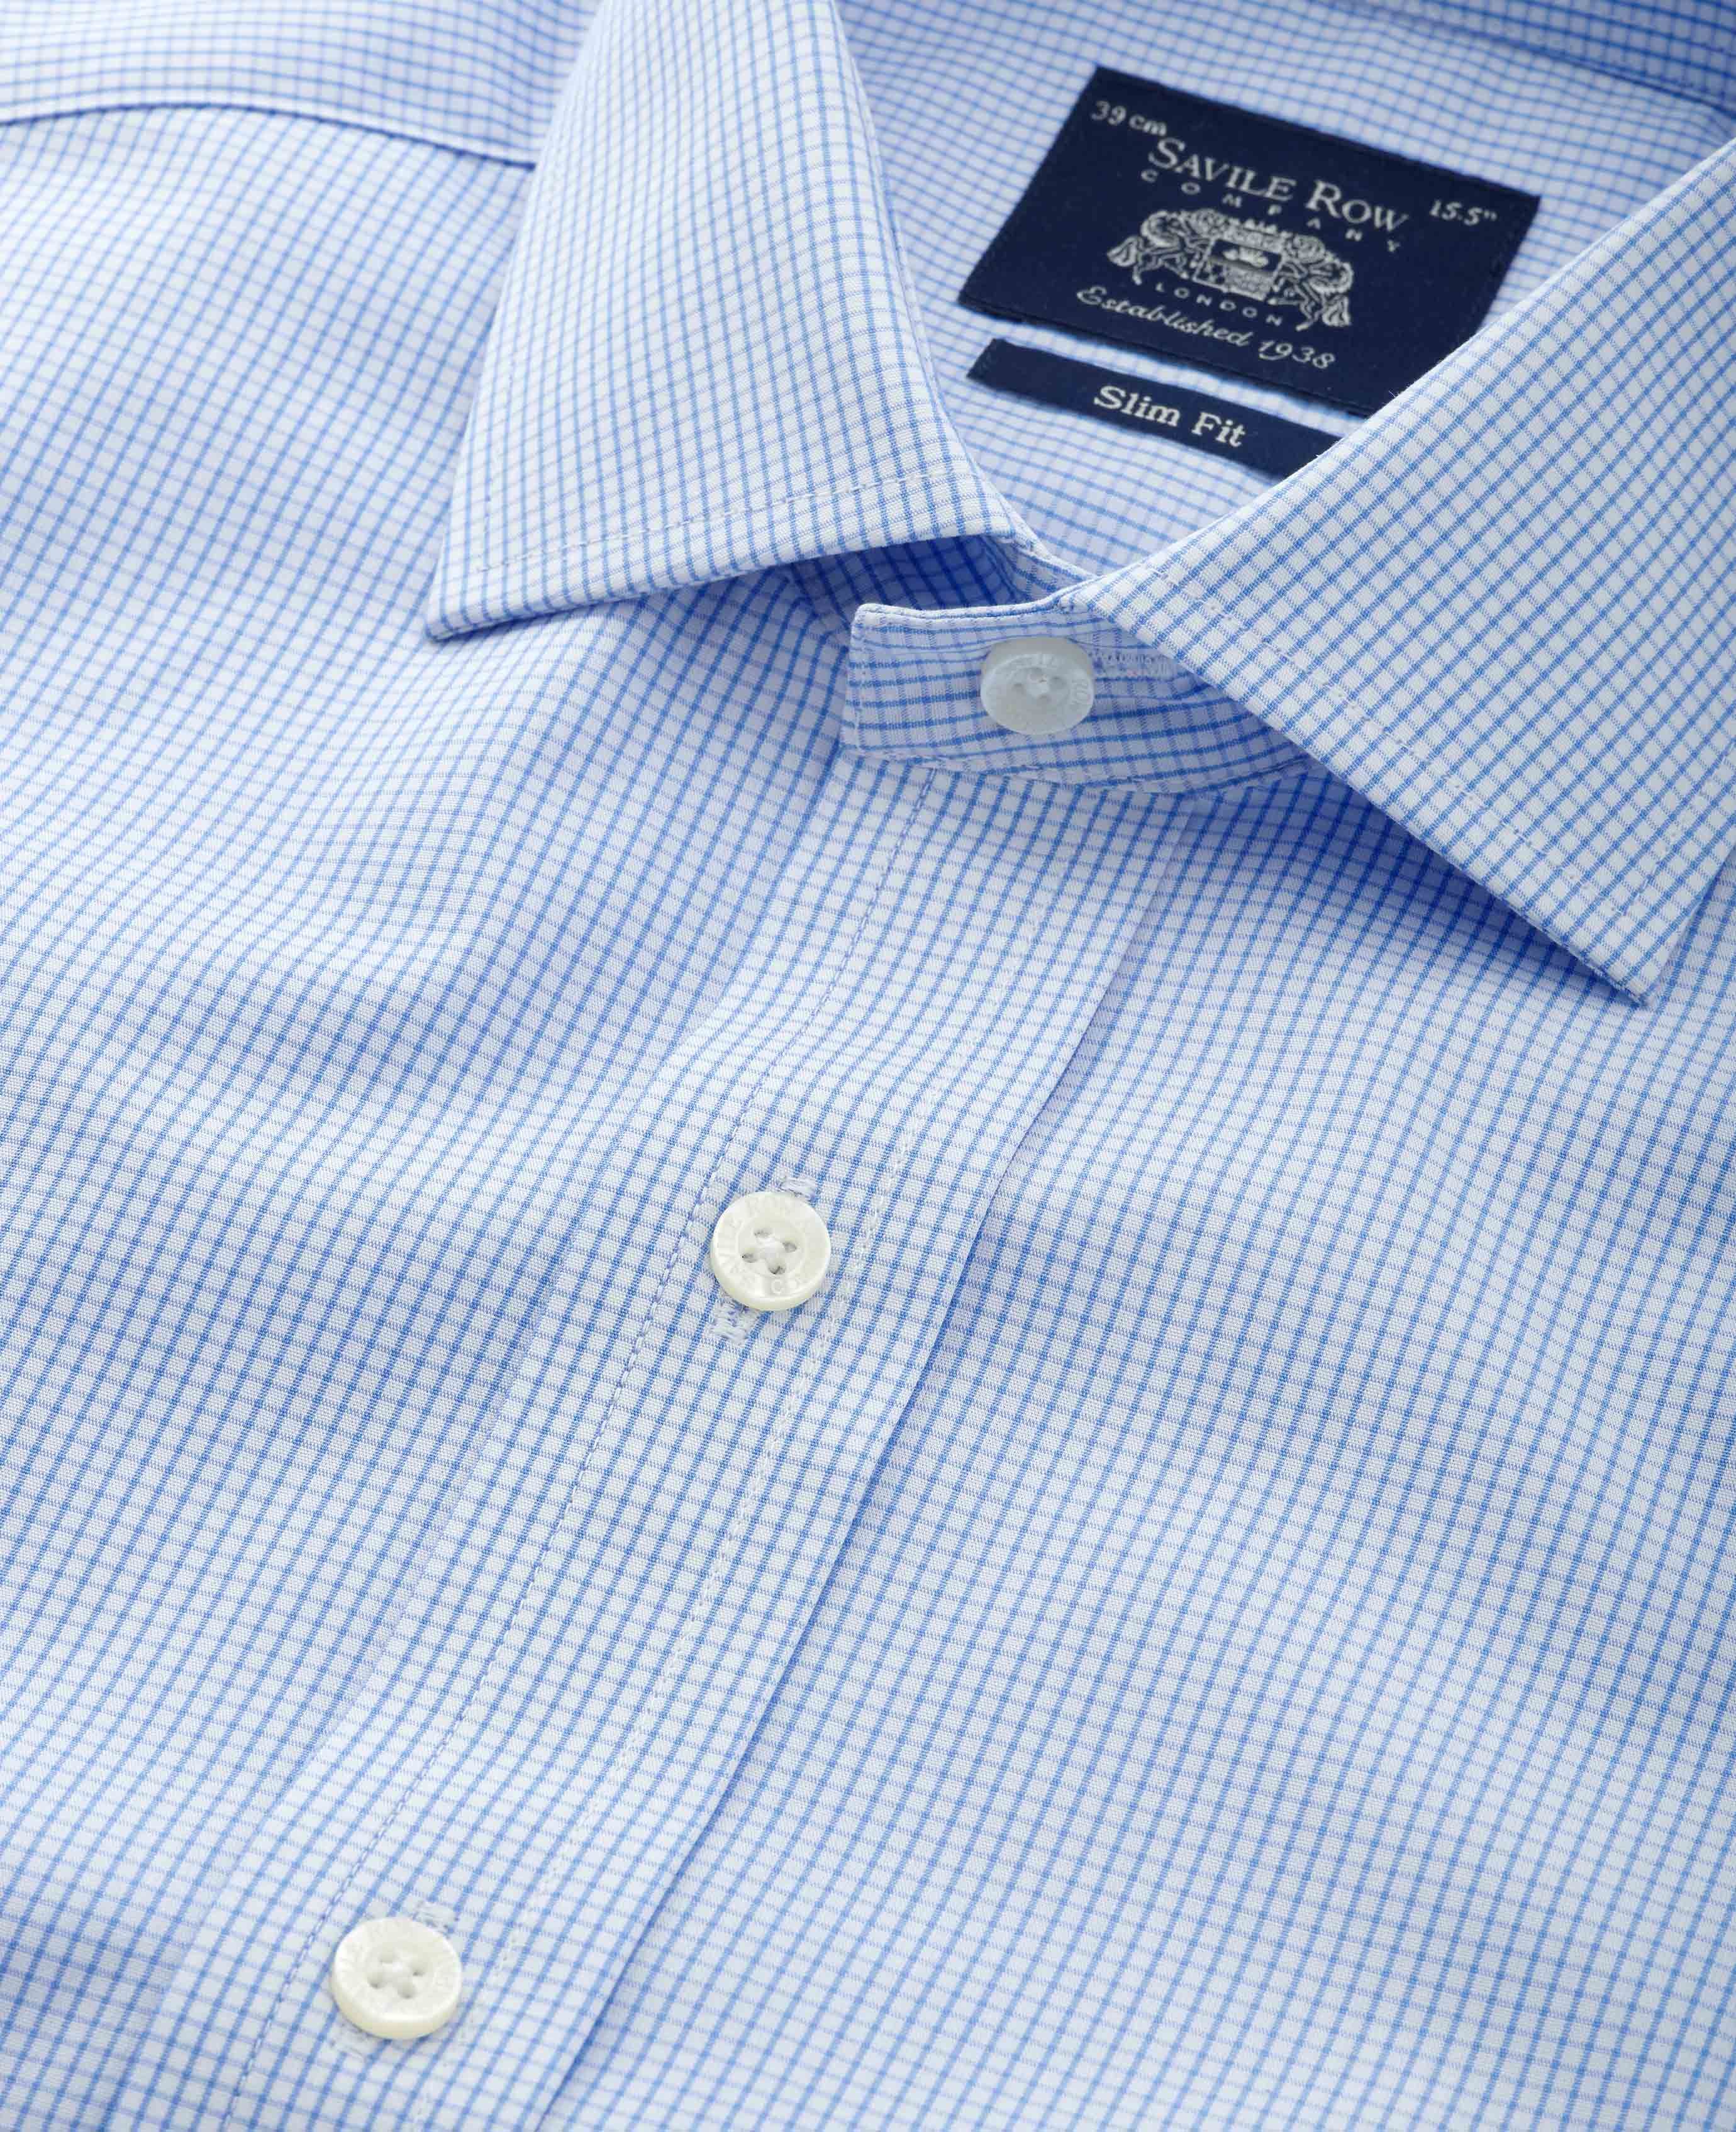 Men's Blue Check Slim Fit Formal Shirt With Single Cuffs | Savile Row Co